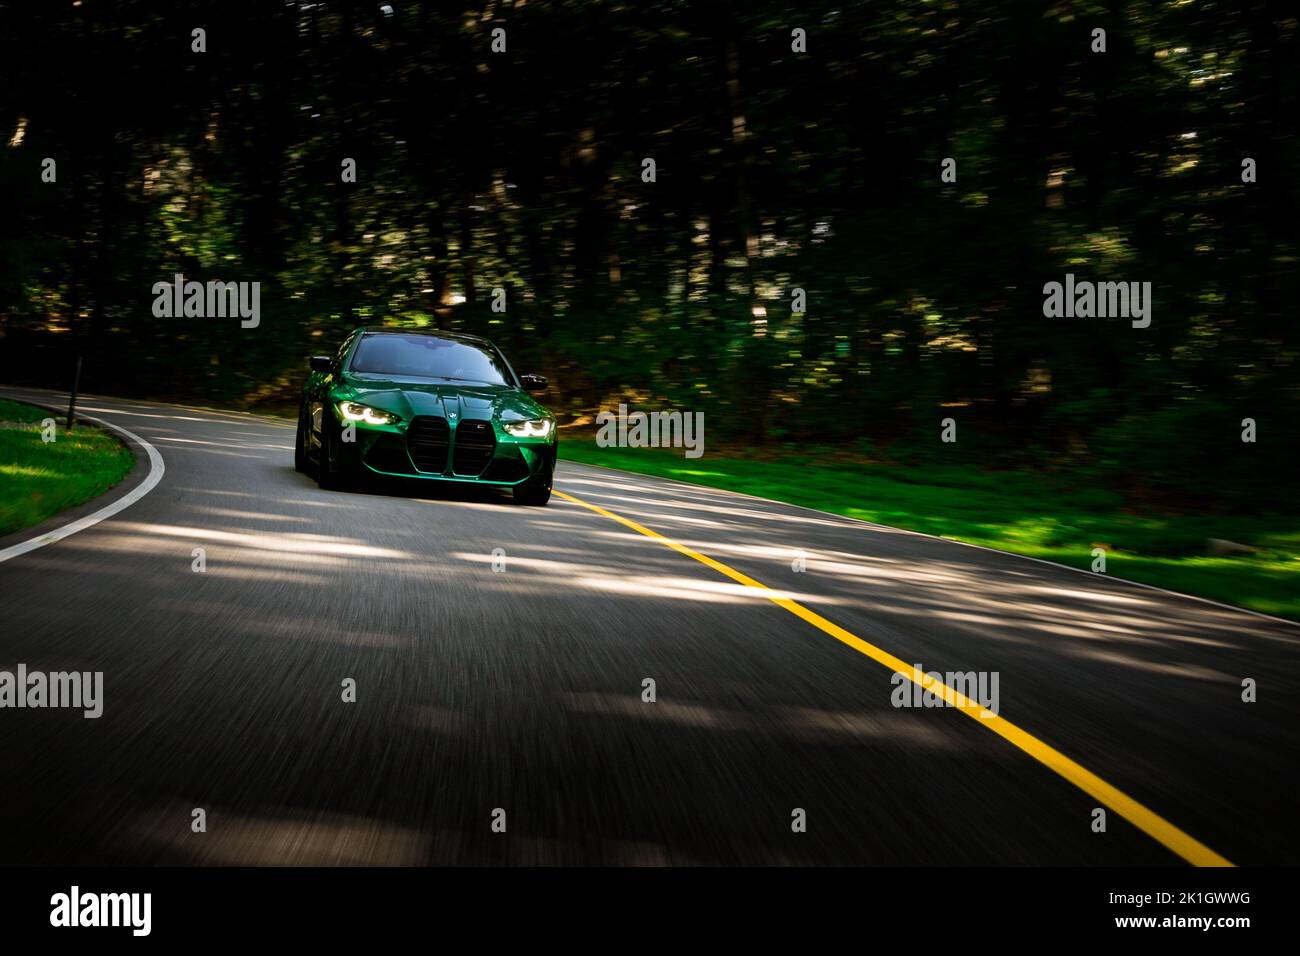 Rolling shot of BMW M4 Performance on asphalt road with trees blurring by in the background Stock Photo